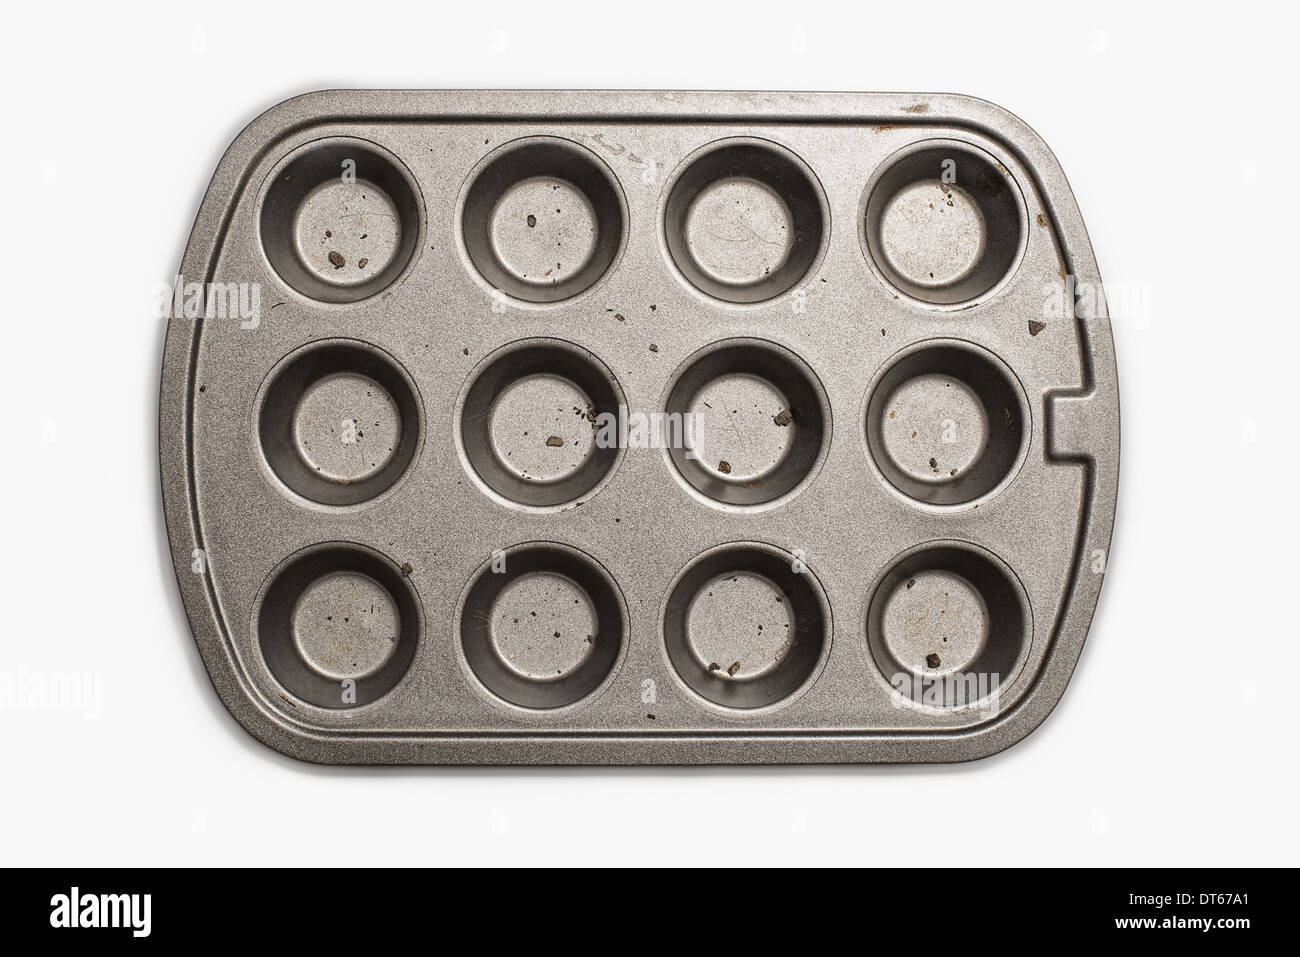 A well used, seasoned baking tray. Cookware.  A cupcake or muffin tin. Stock Photo